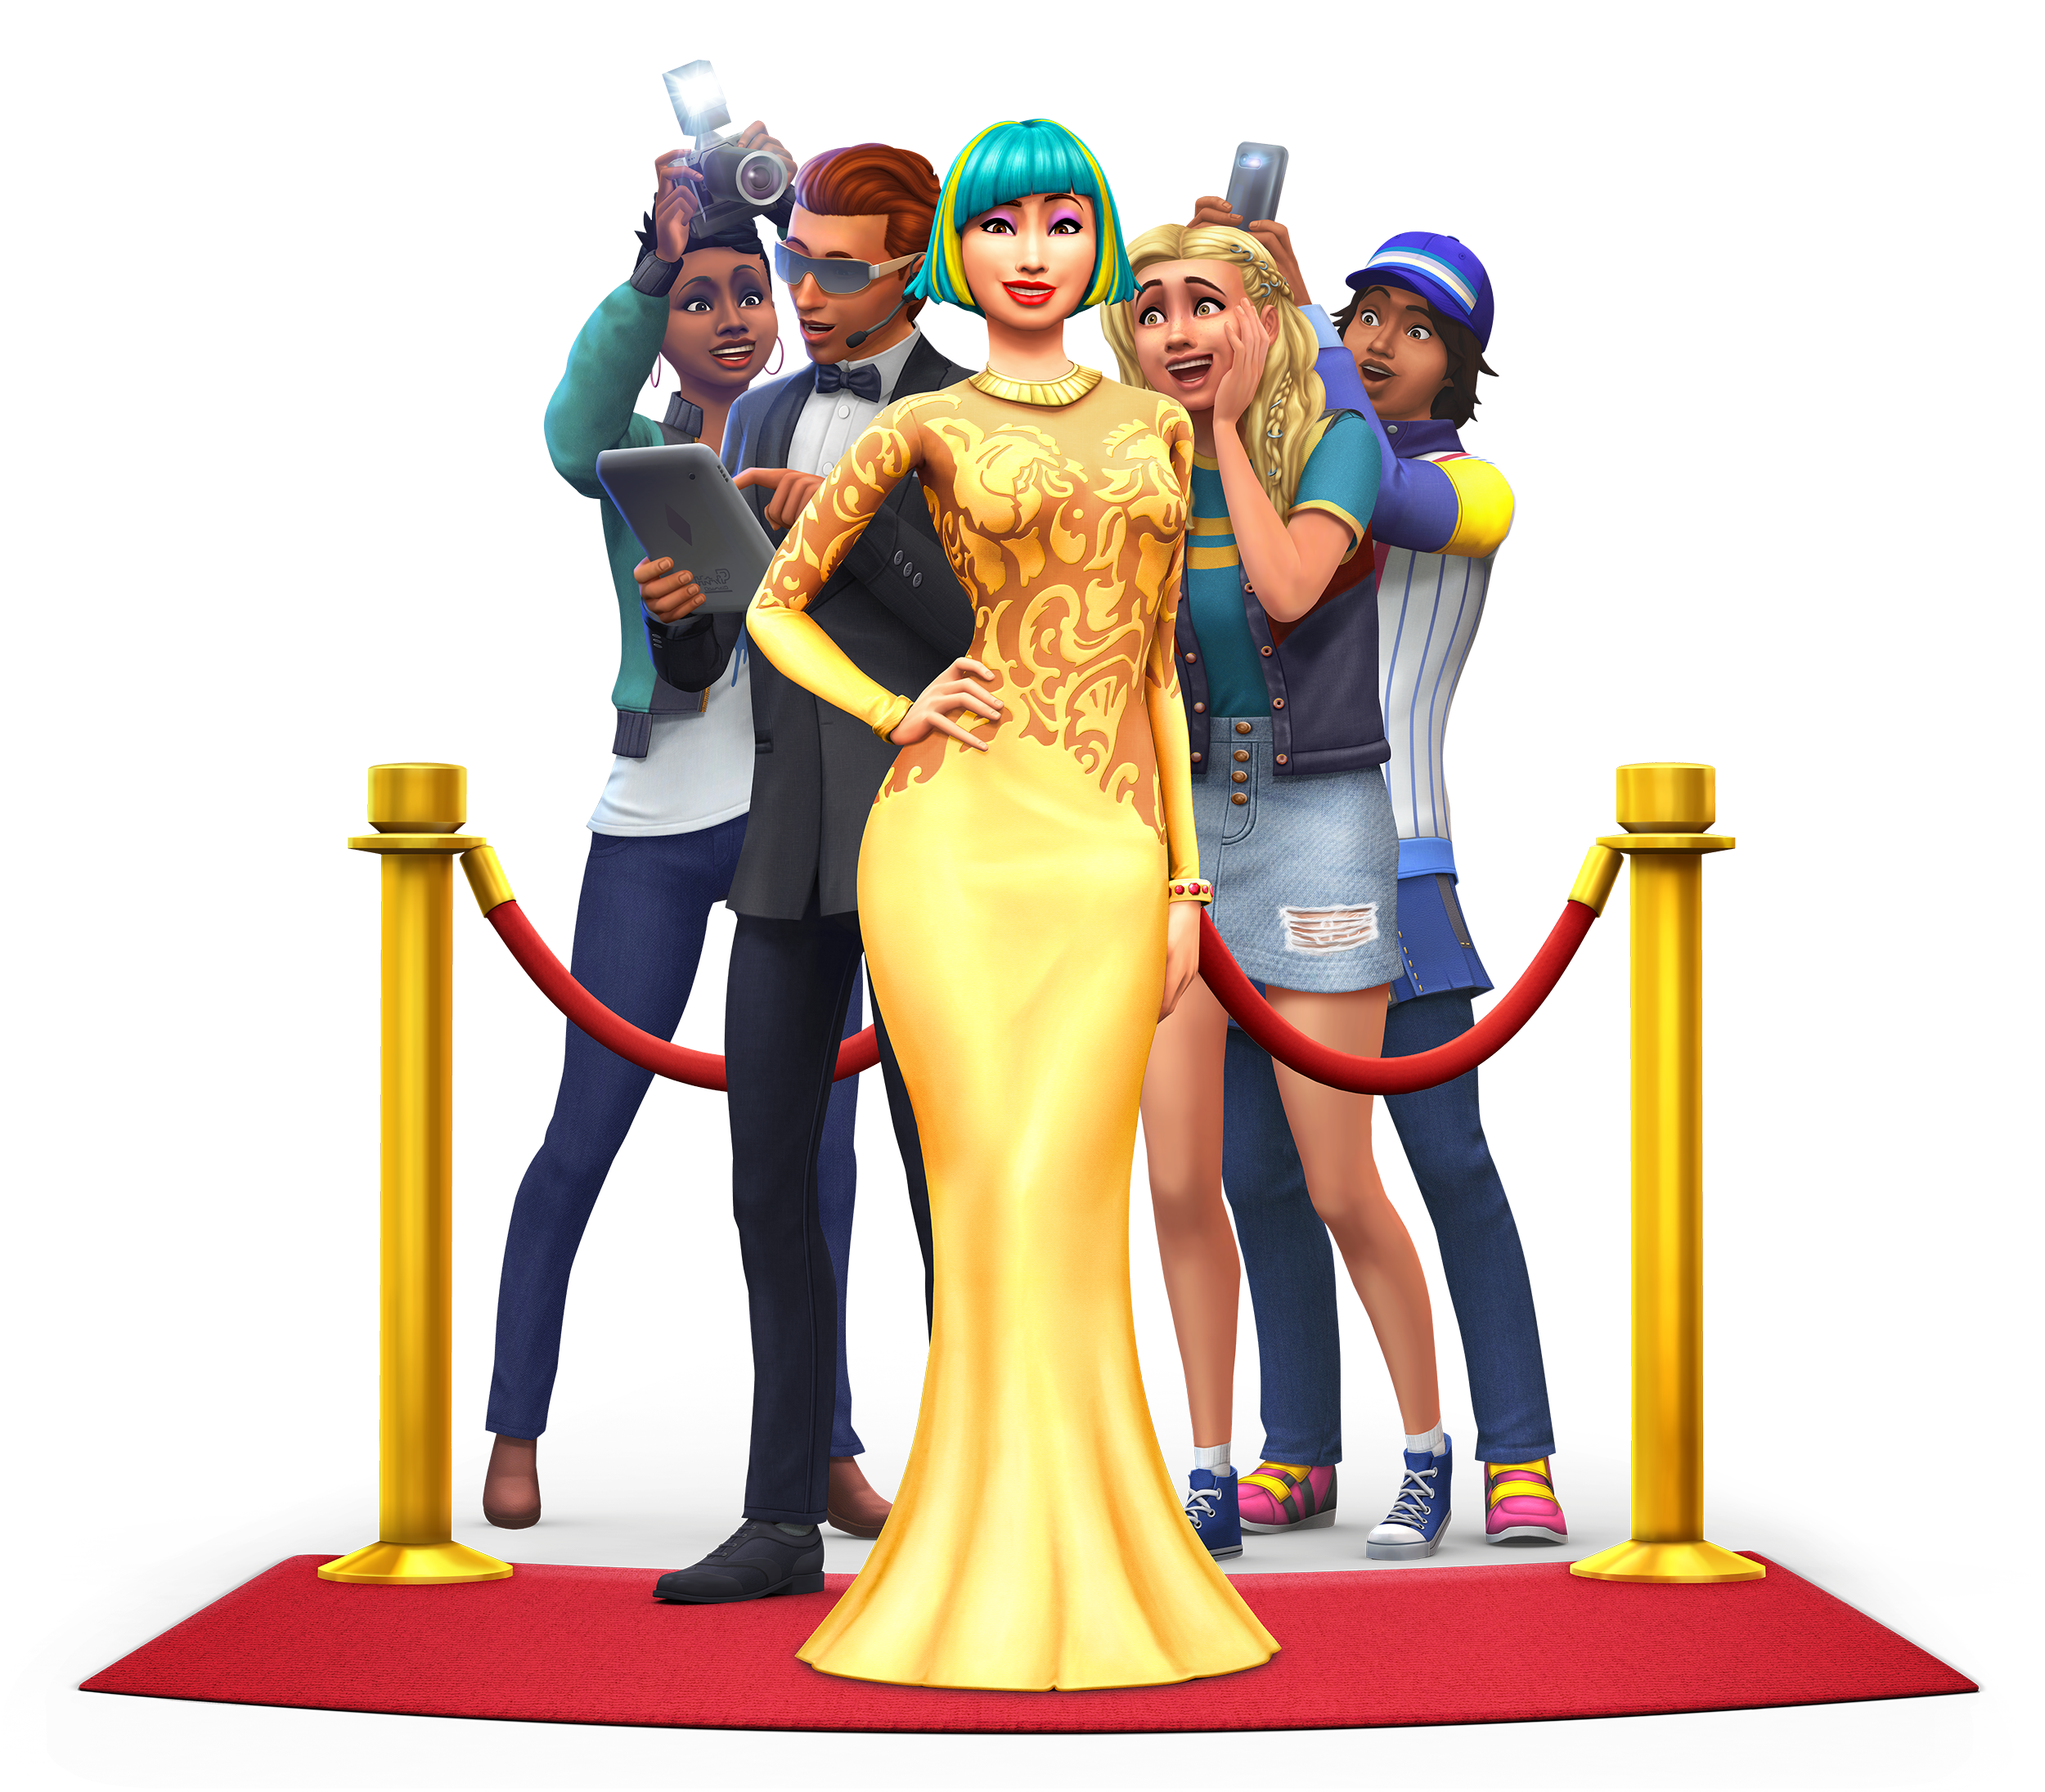 the sims 4 get famous